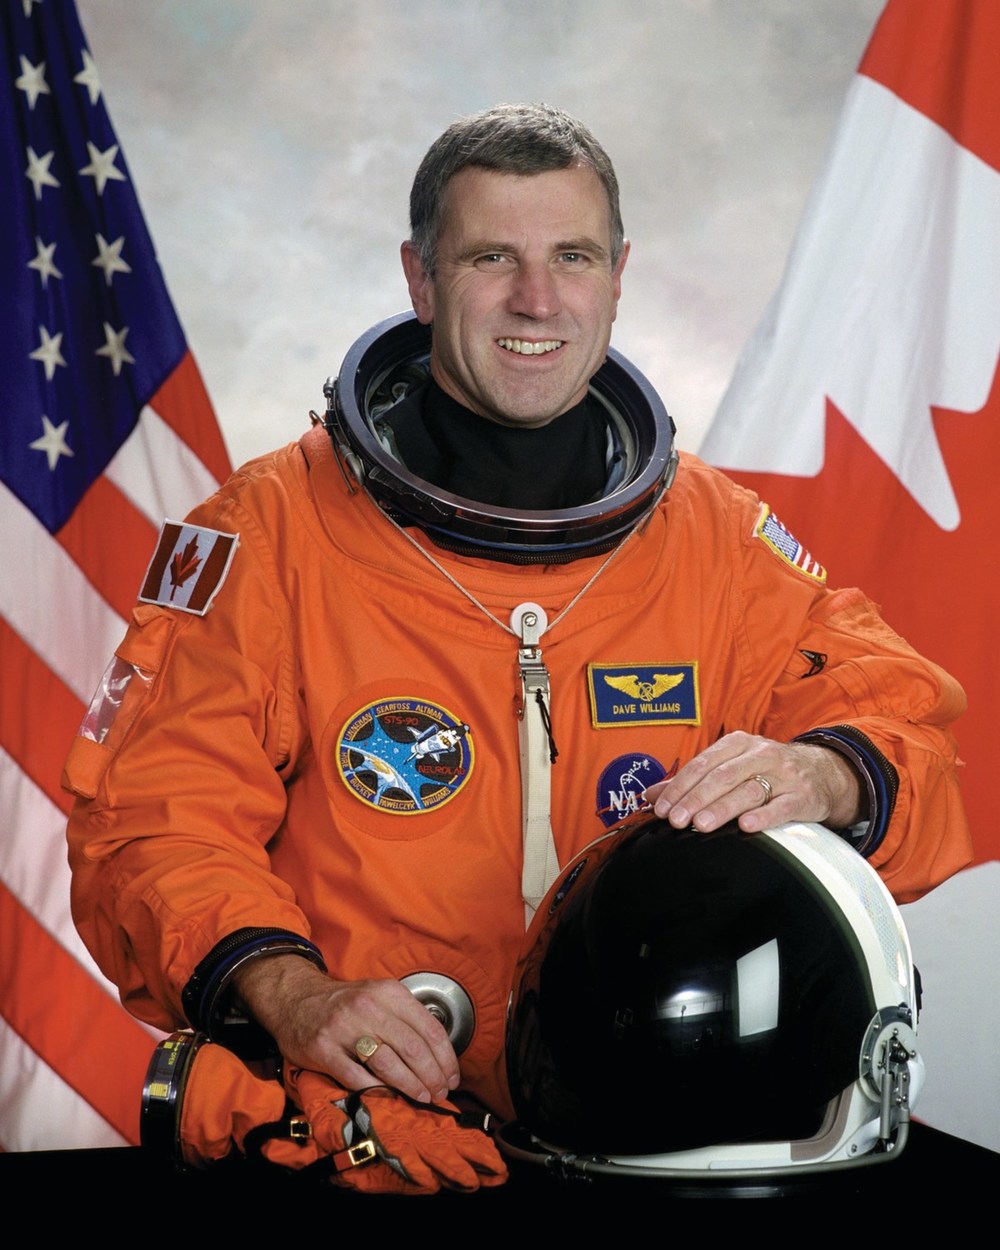 Celebrate International Astronomy Day at the Ontario Science Centre on April 21 with special guest Dr. Dave Williams, former Canadian Space Agency astronaut. (CNW Group/Ontario Science Centre)